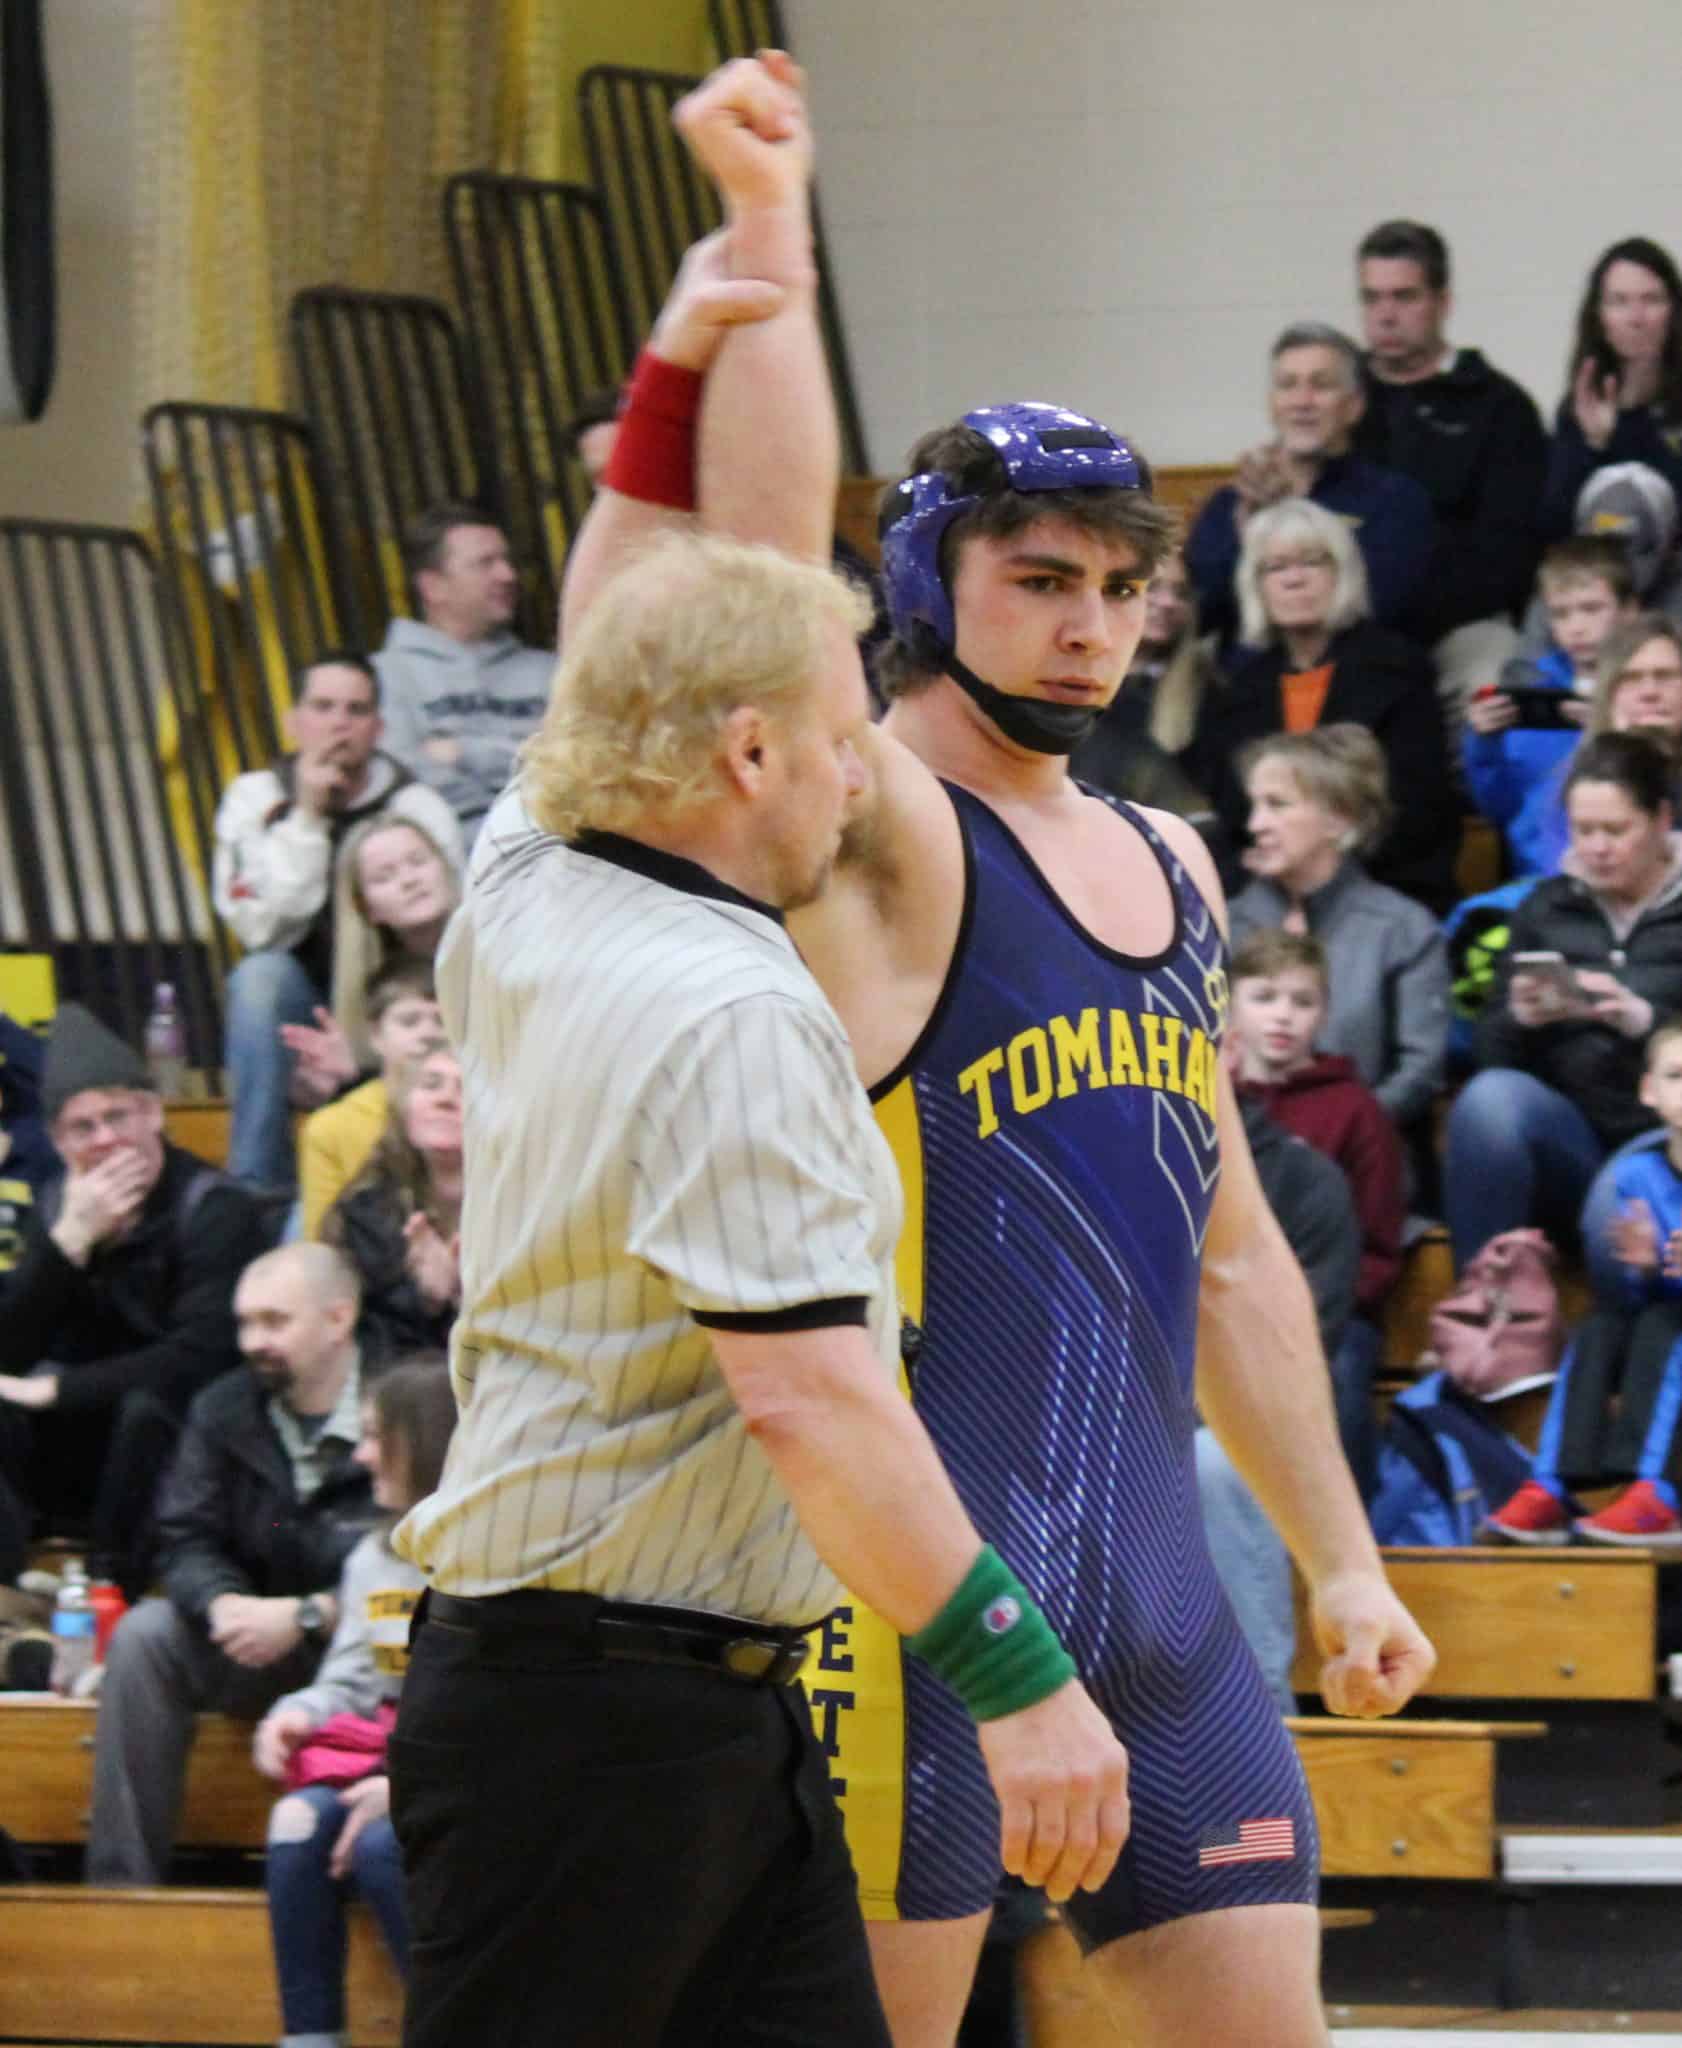 Hatchet grapplers rout Athens, take 2nd in GNC in Medford